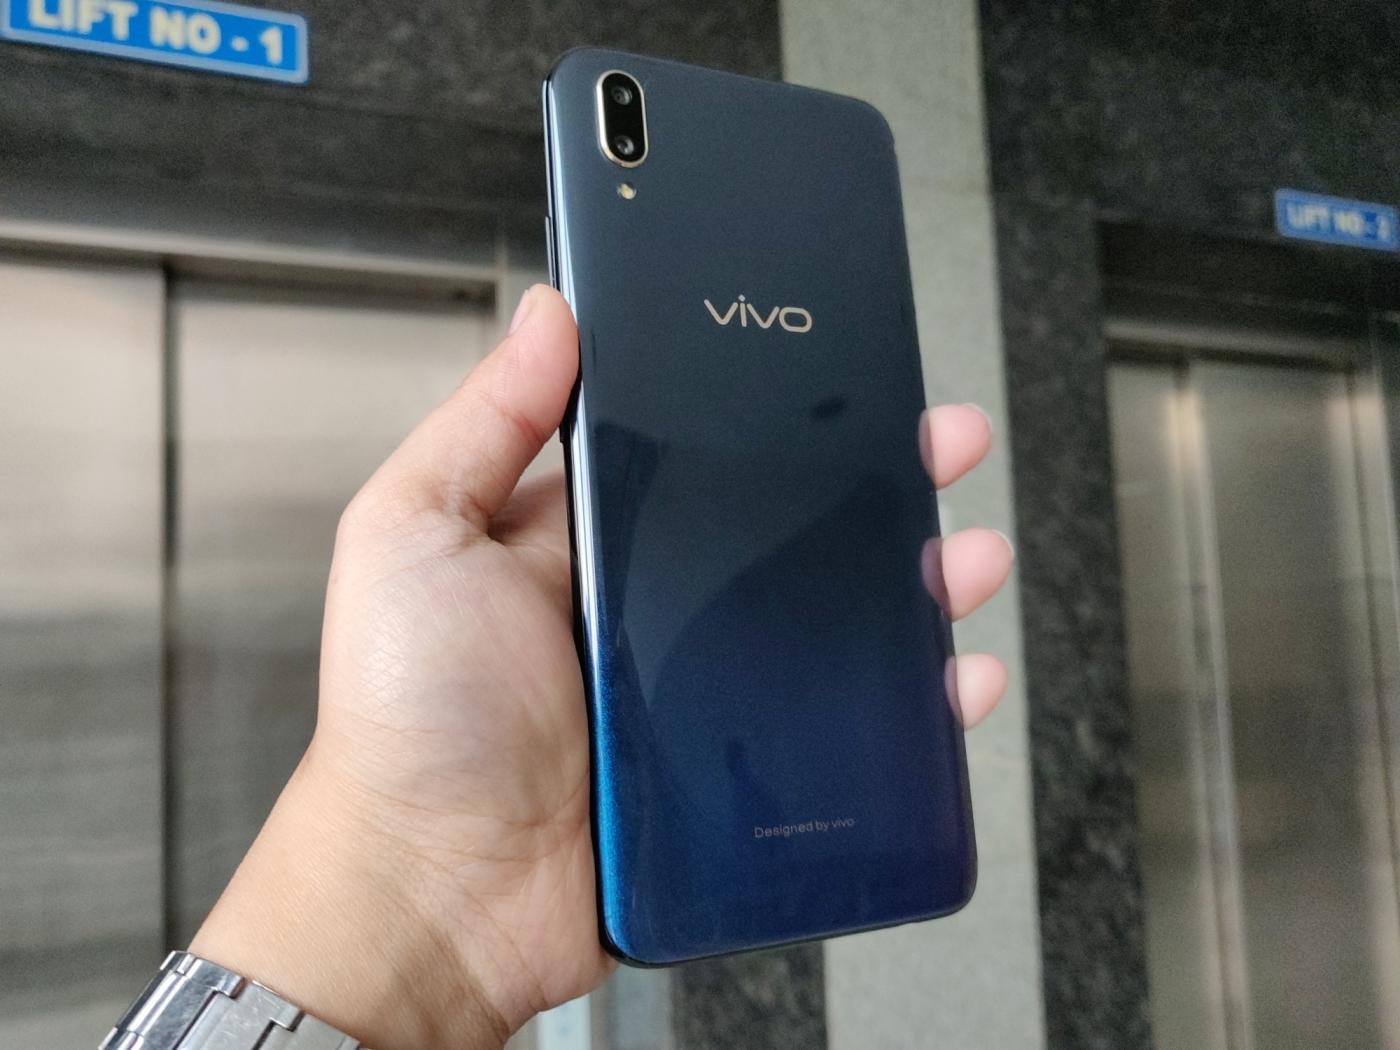 Vivo V11 Pro: Auto HDR mode which resulted in crisp and well-balanced pictures with the right amount of exposure of dark and bright areas. by .